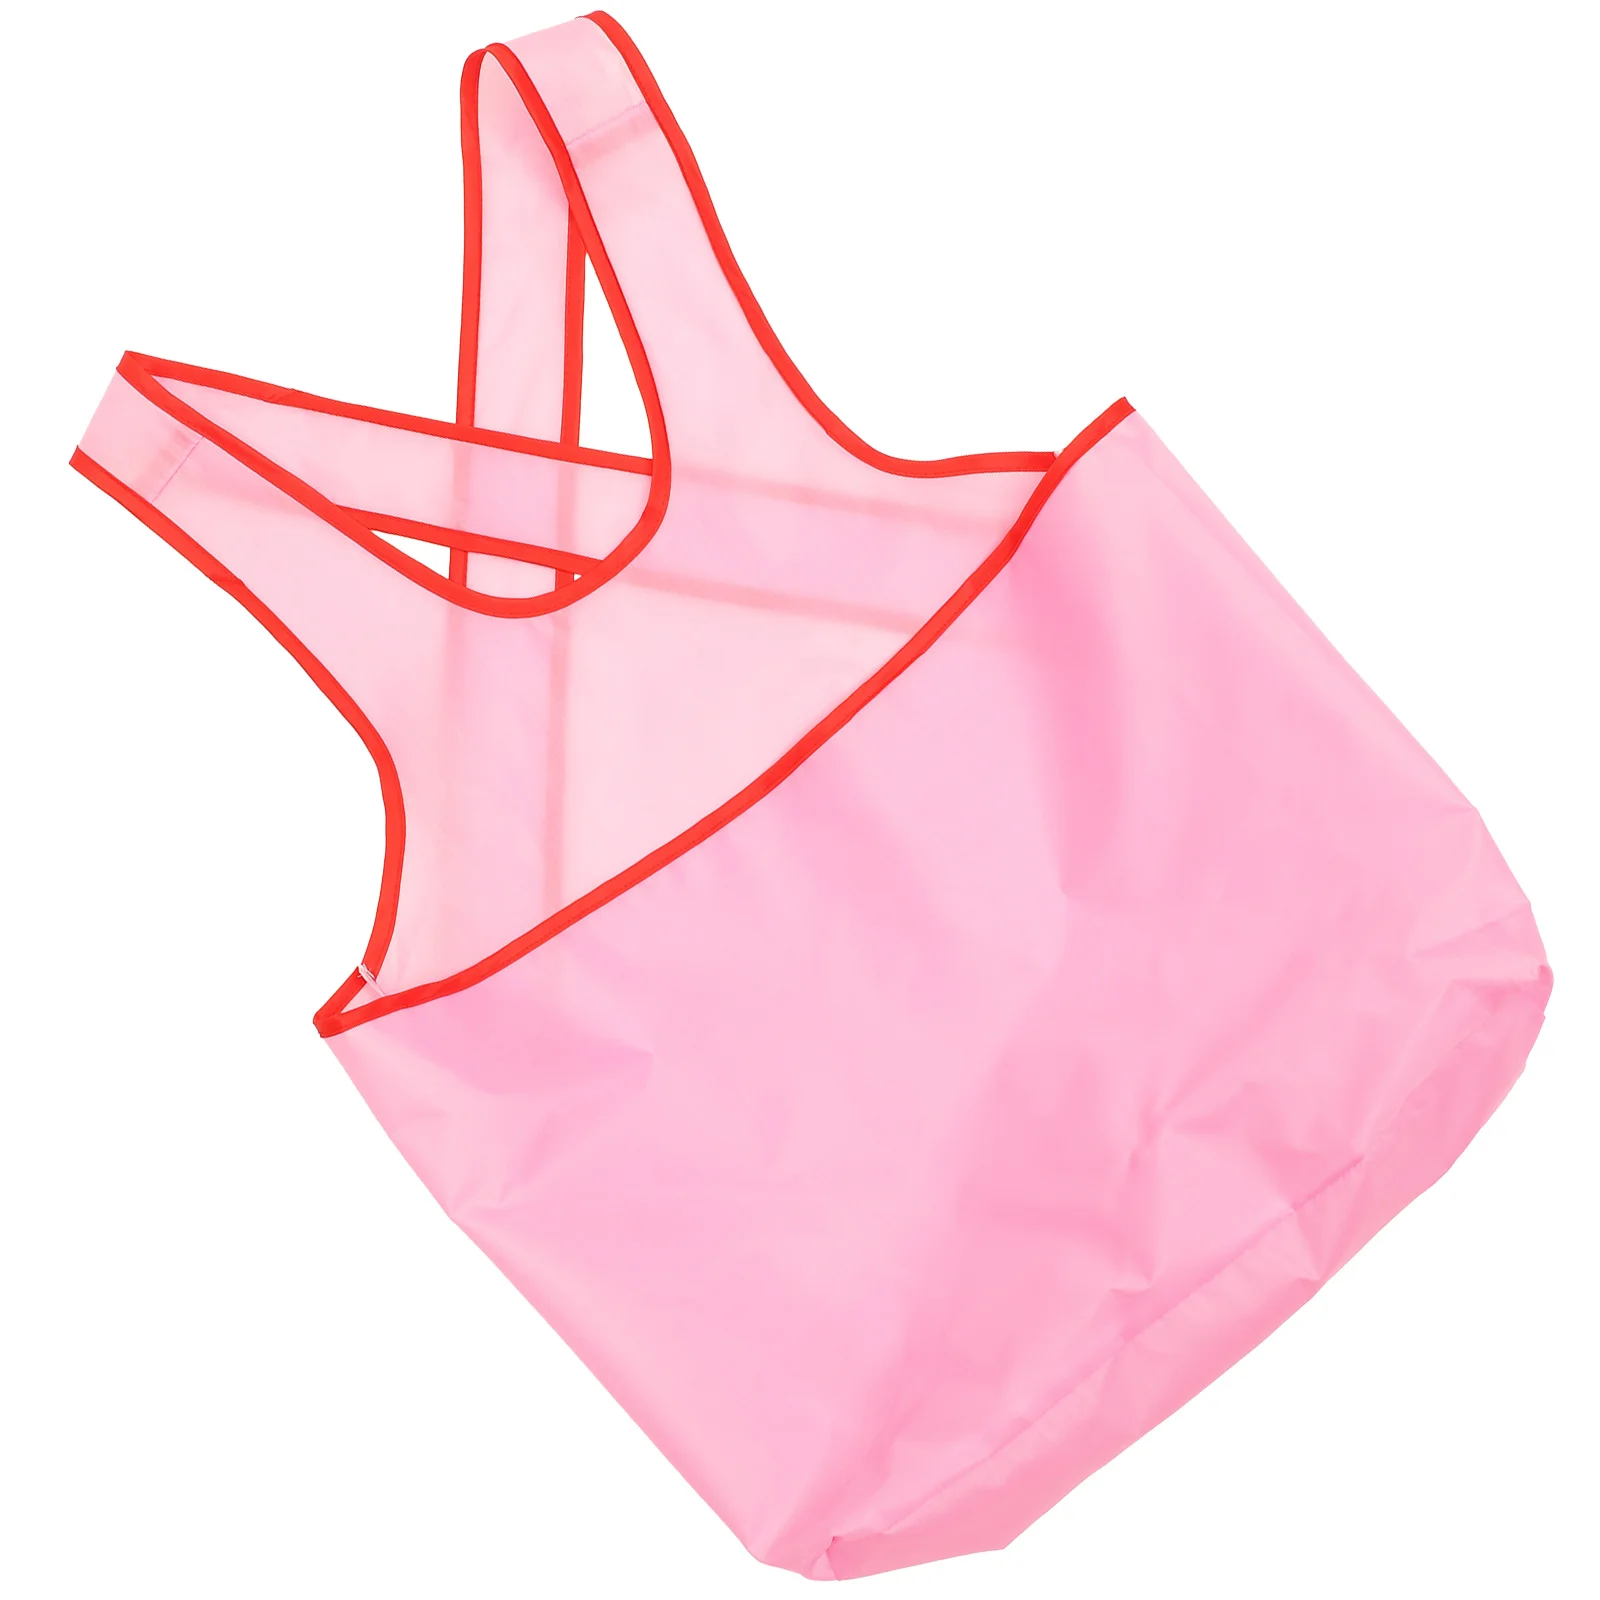 

Housework Apron Clothes Hanging Aprons for Home Wet Net Bag Bibs Cooking Pink Women's